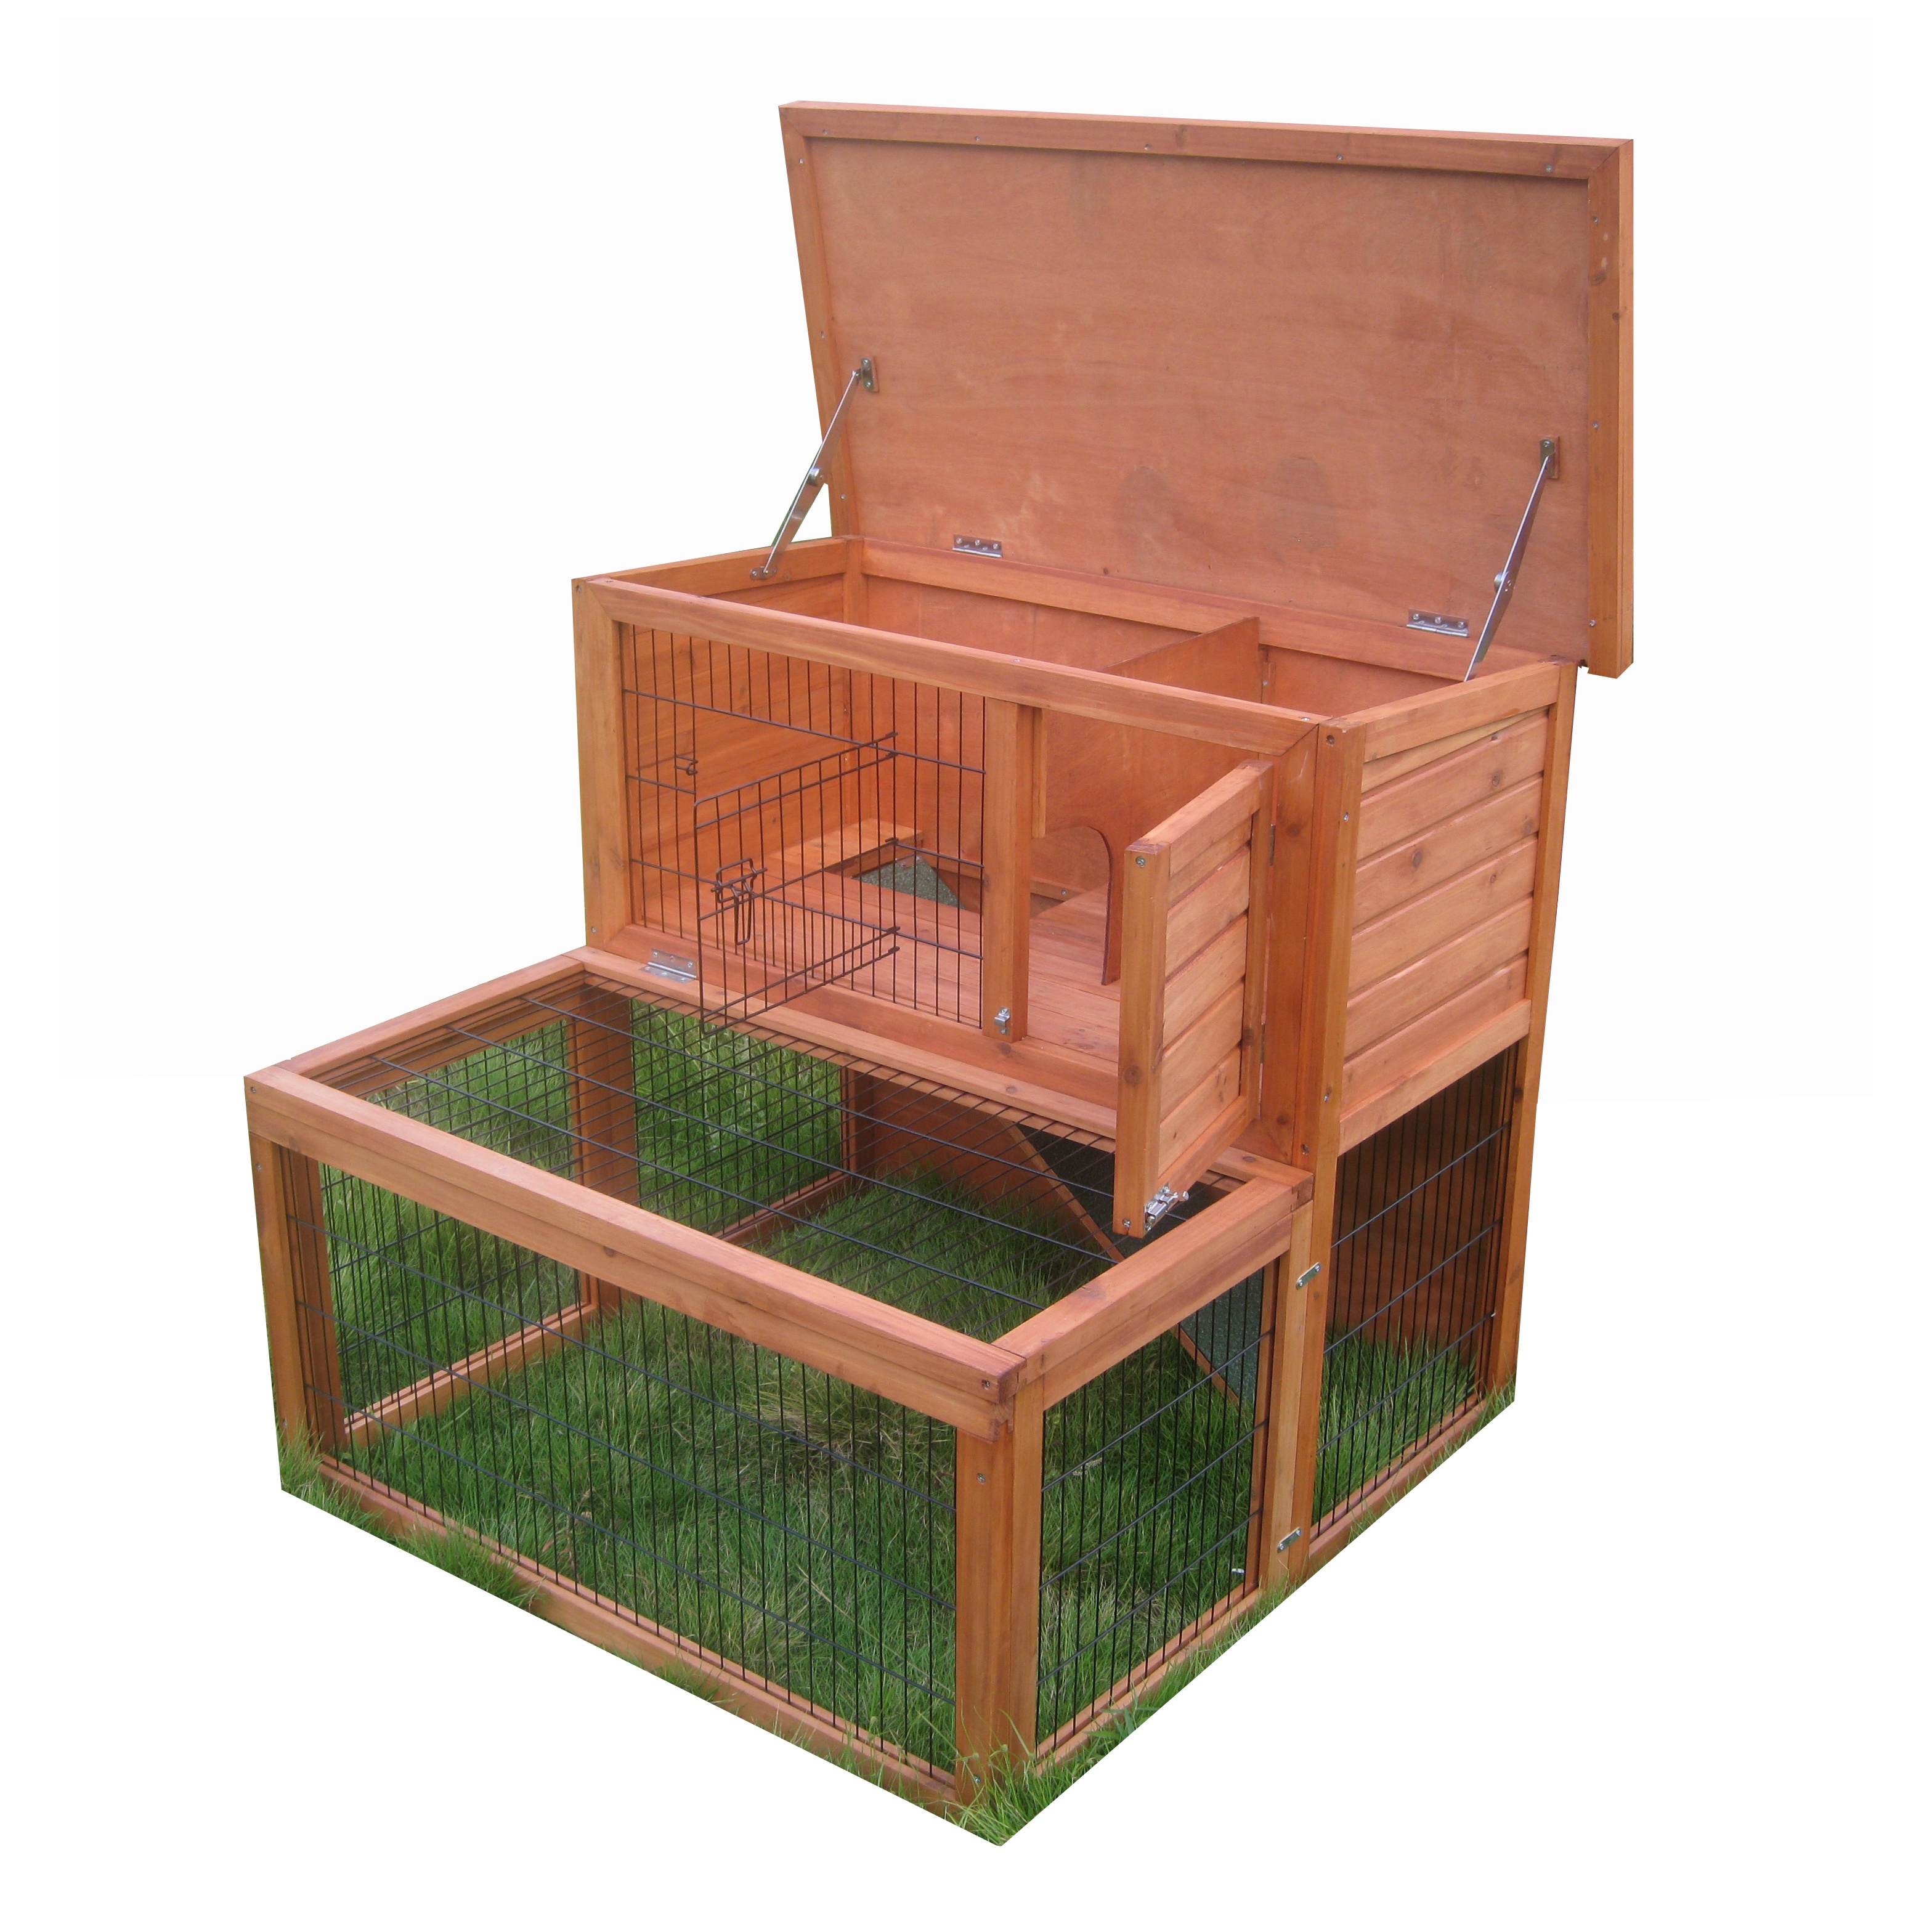 Large Outdoor Raised Painted Deluxe Guinea Pig House Wood Rabbit Hutch Bunny Outdoor Animal Cage Enclosure shelter